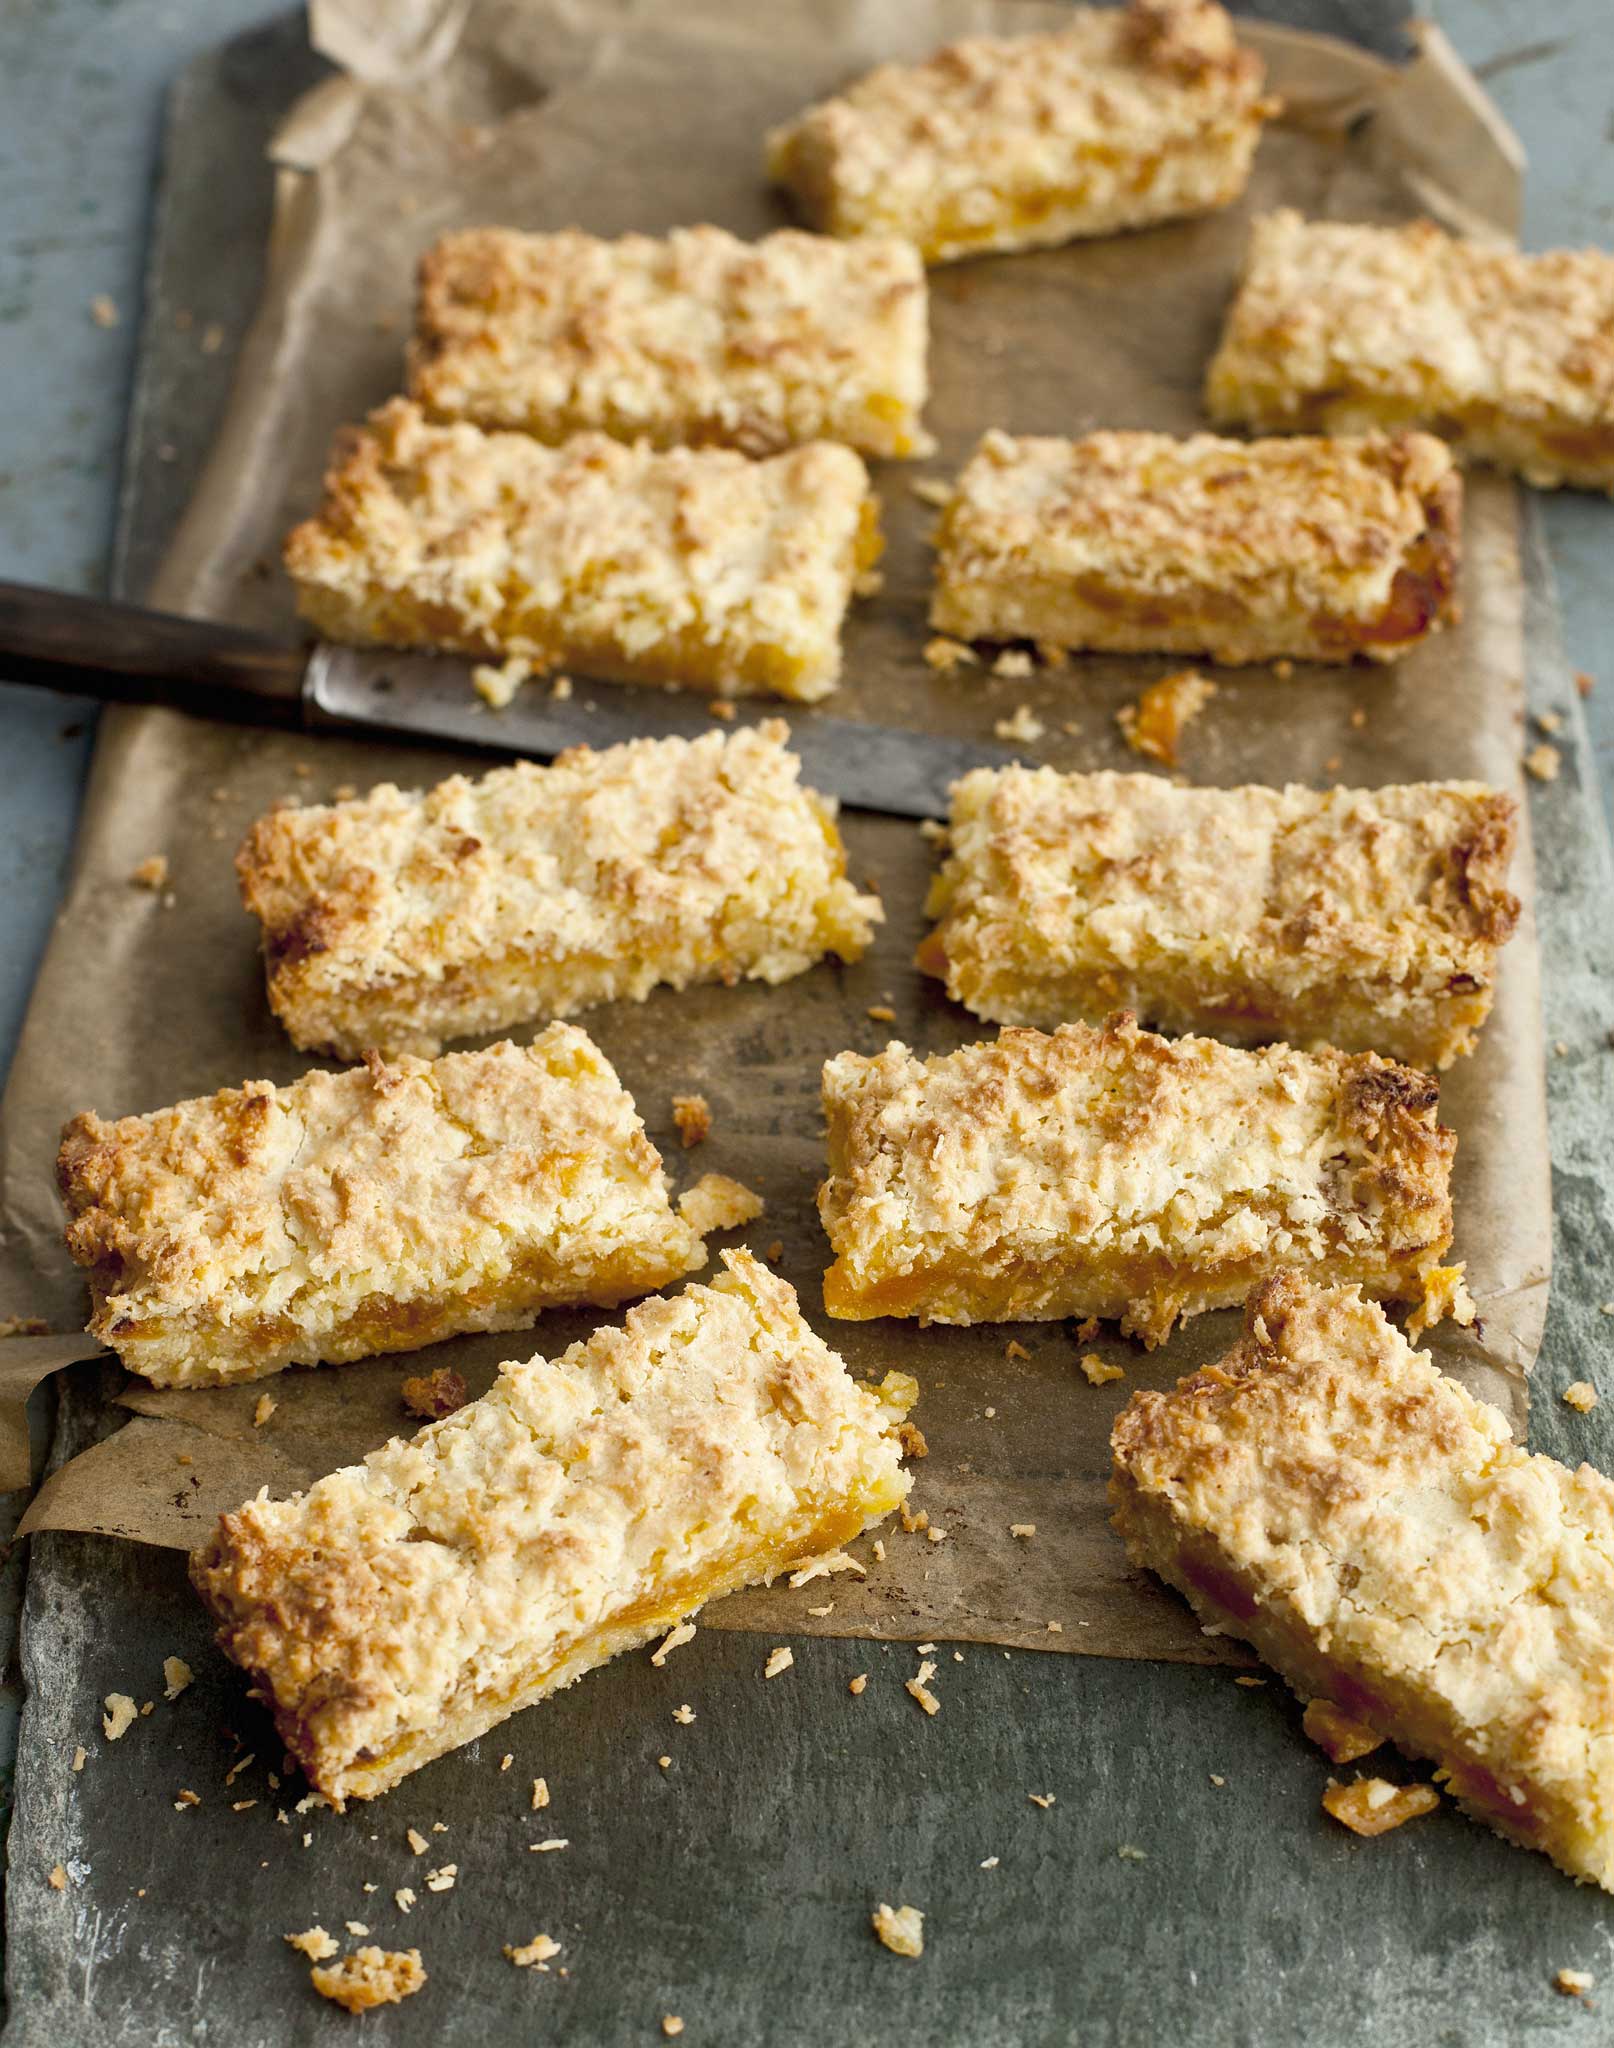 Family favourite: Coconut and apricot slice